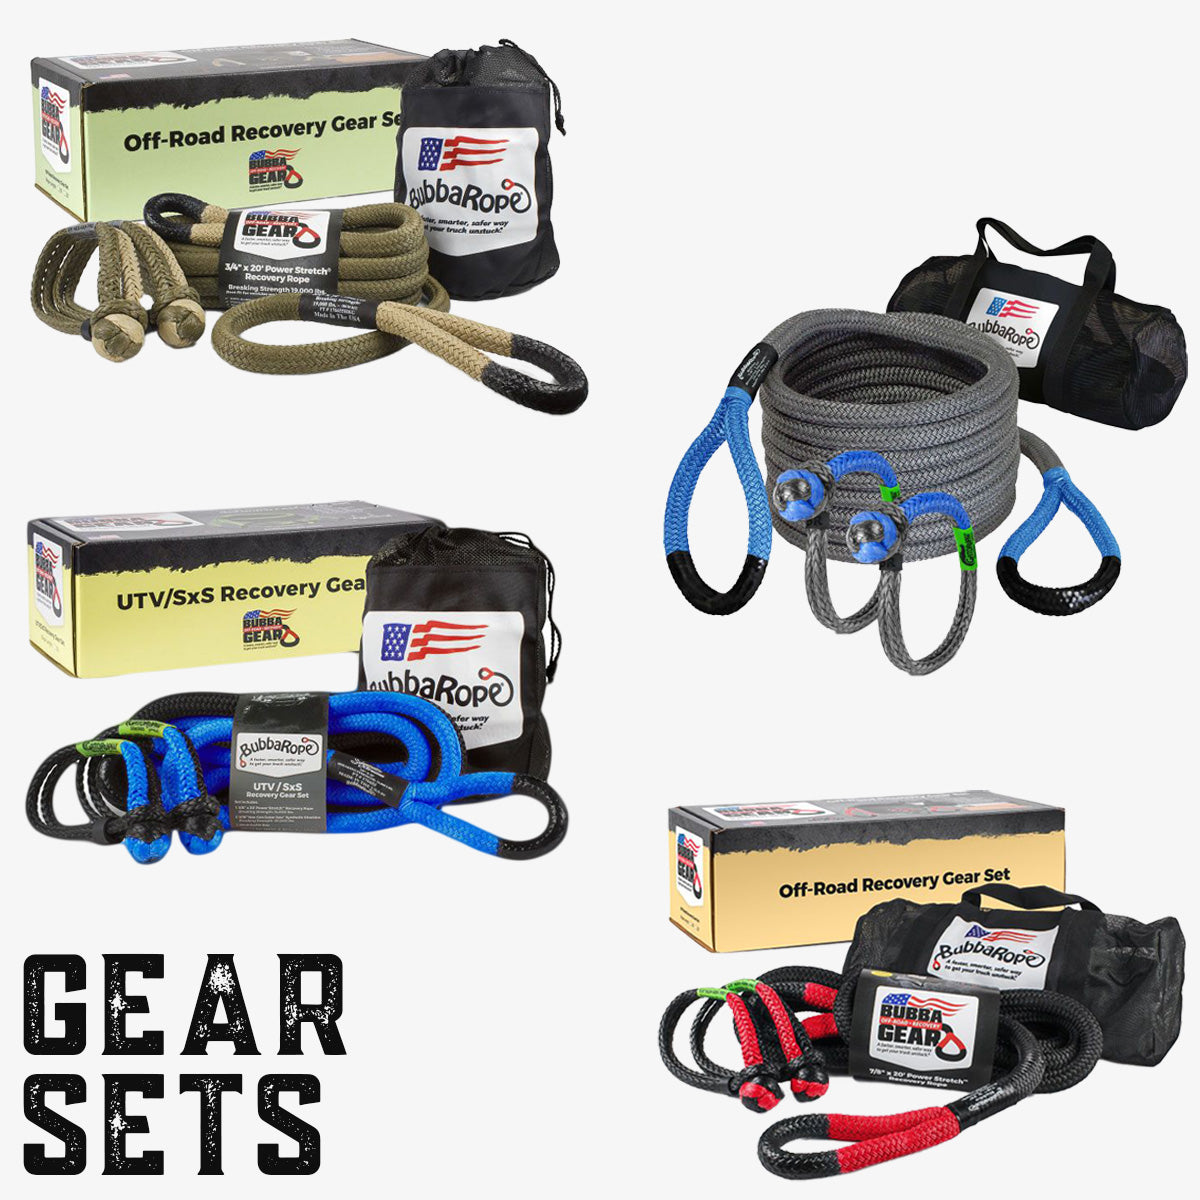 Bubba Rope Recovery Gear Sets